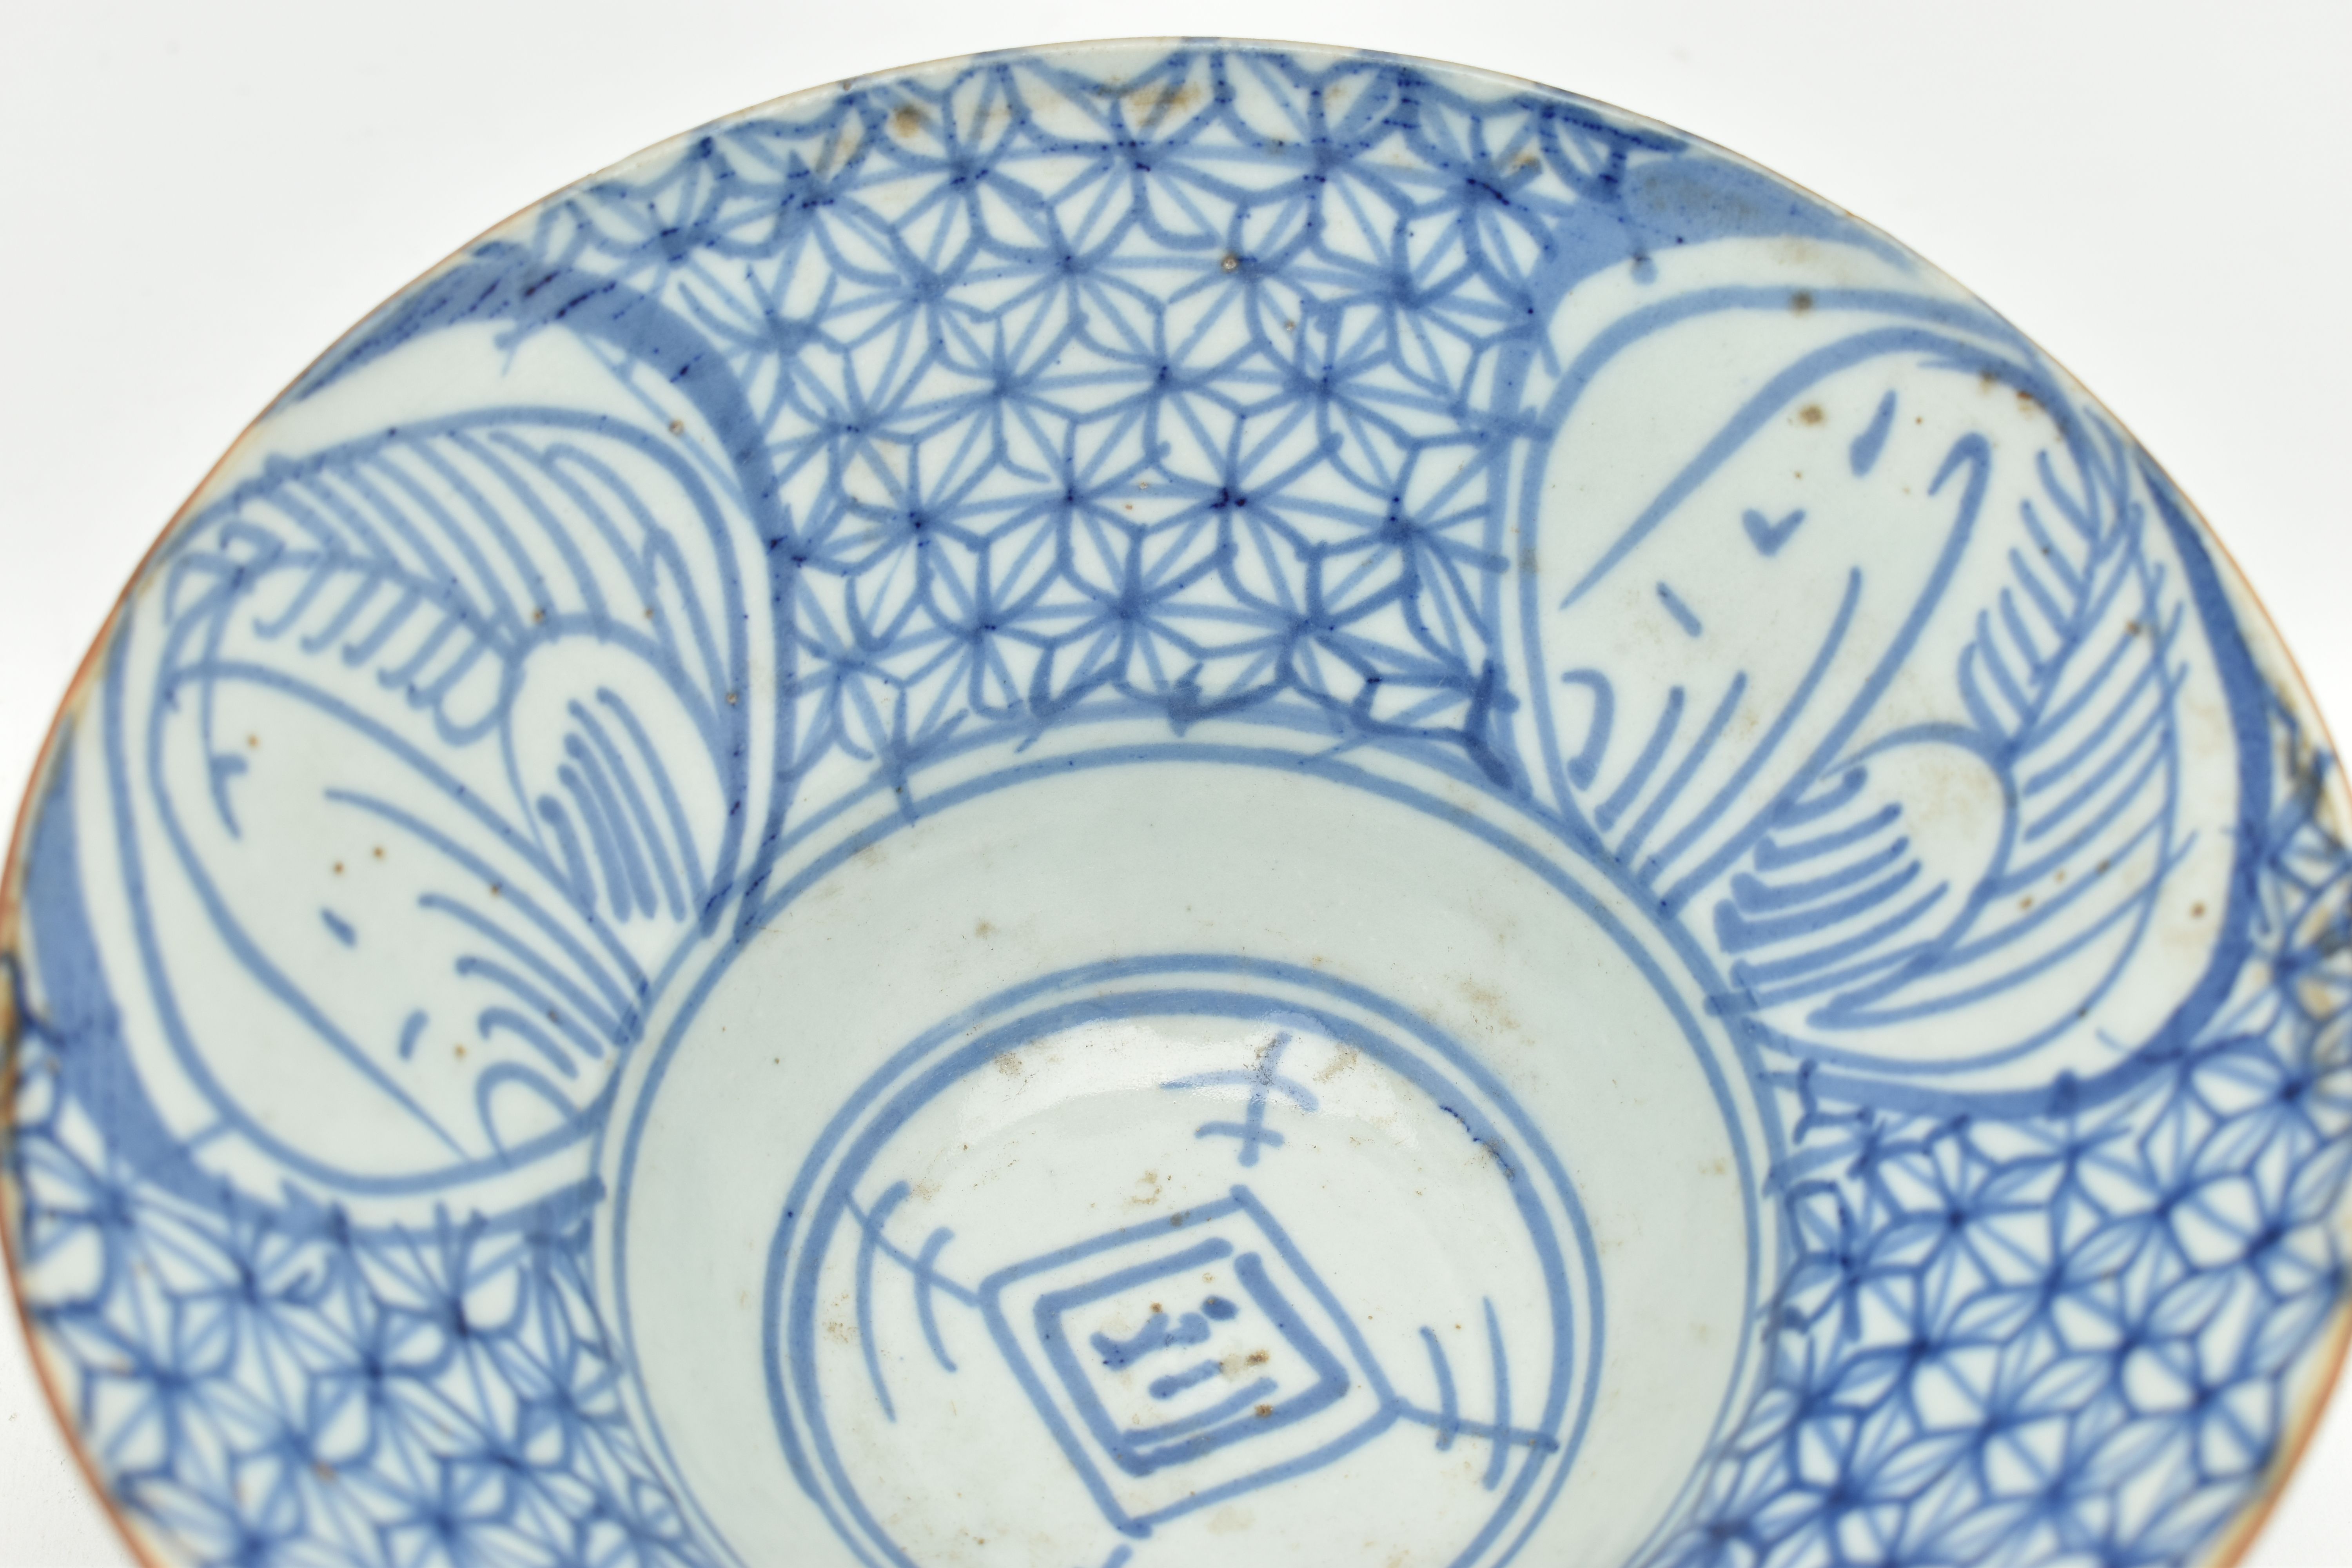 A LATE 18TH / EARLY 19TH CENTURY CHINESE PORCELAIN BLUE AND WHITE PORCELAIN TEK SING CARGO TYPE - Image 4 of 8